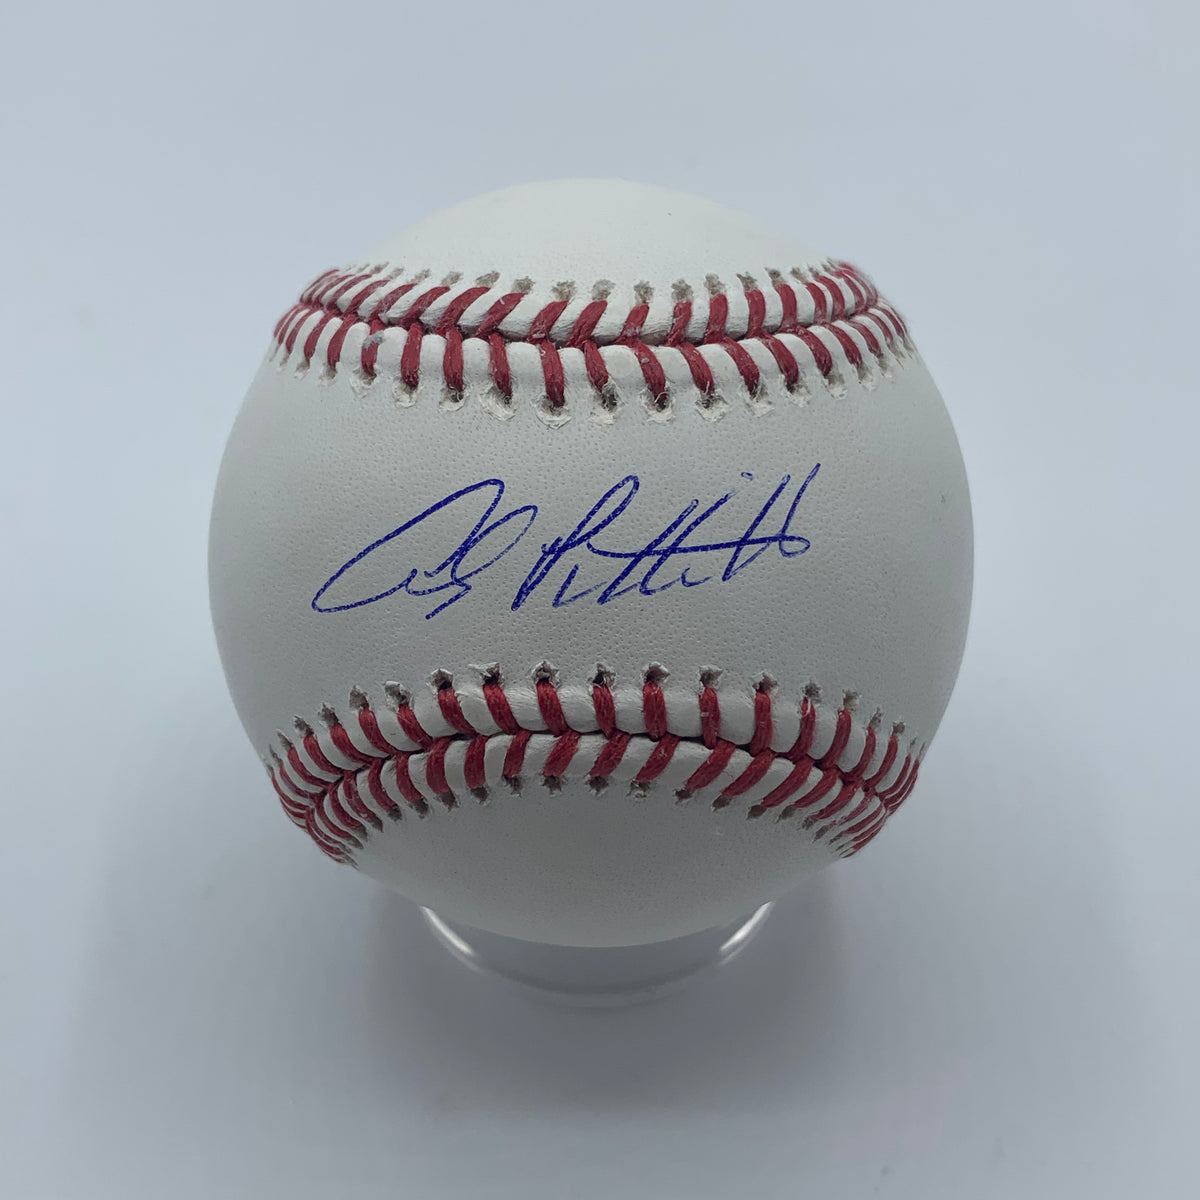 Andy Pettitte Memorabilia, Andy Pettitte Collectibles, MLB Andy